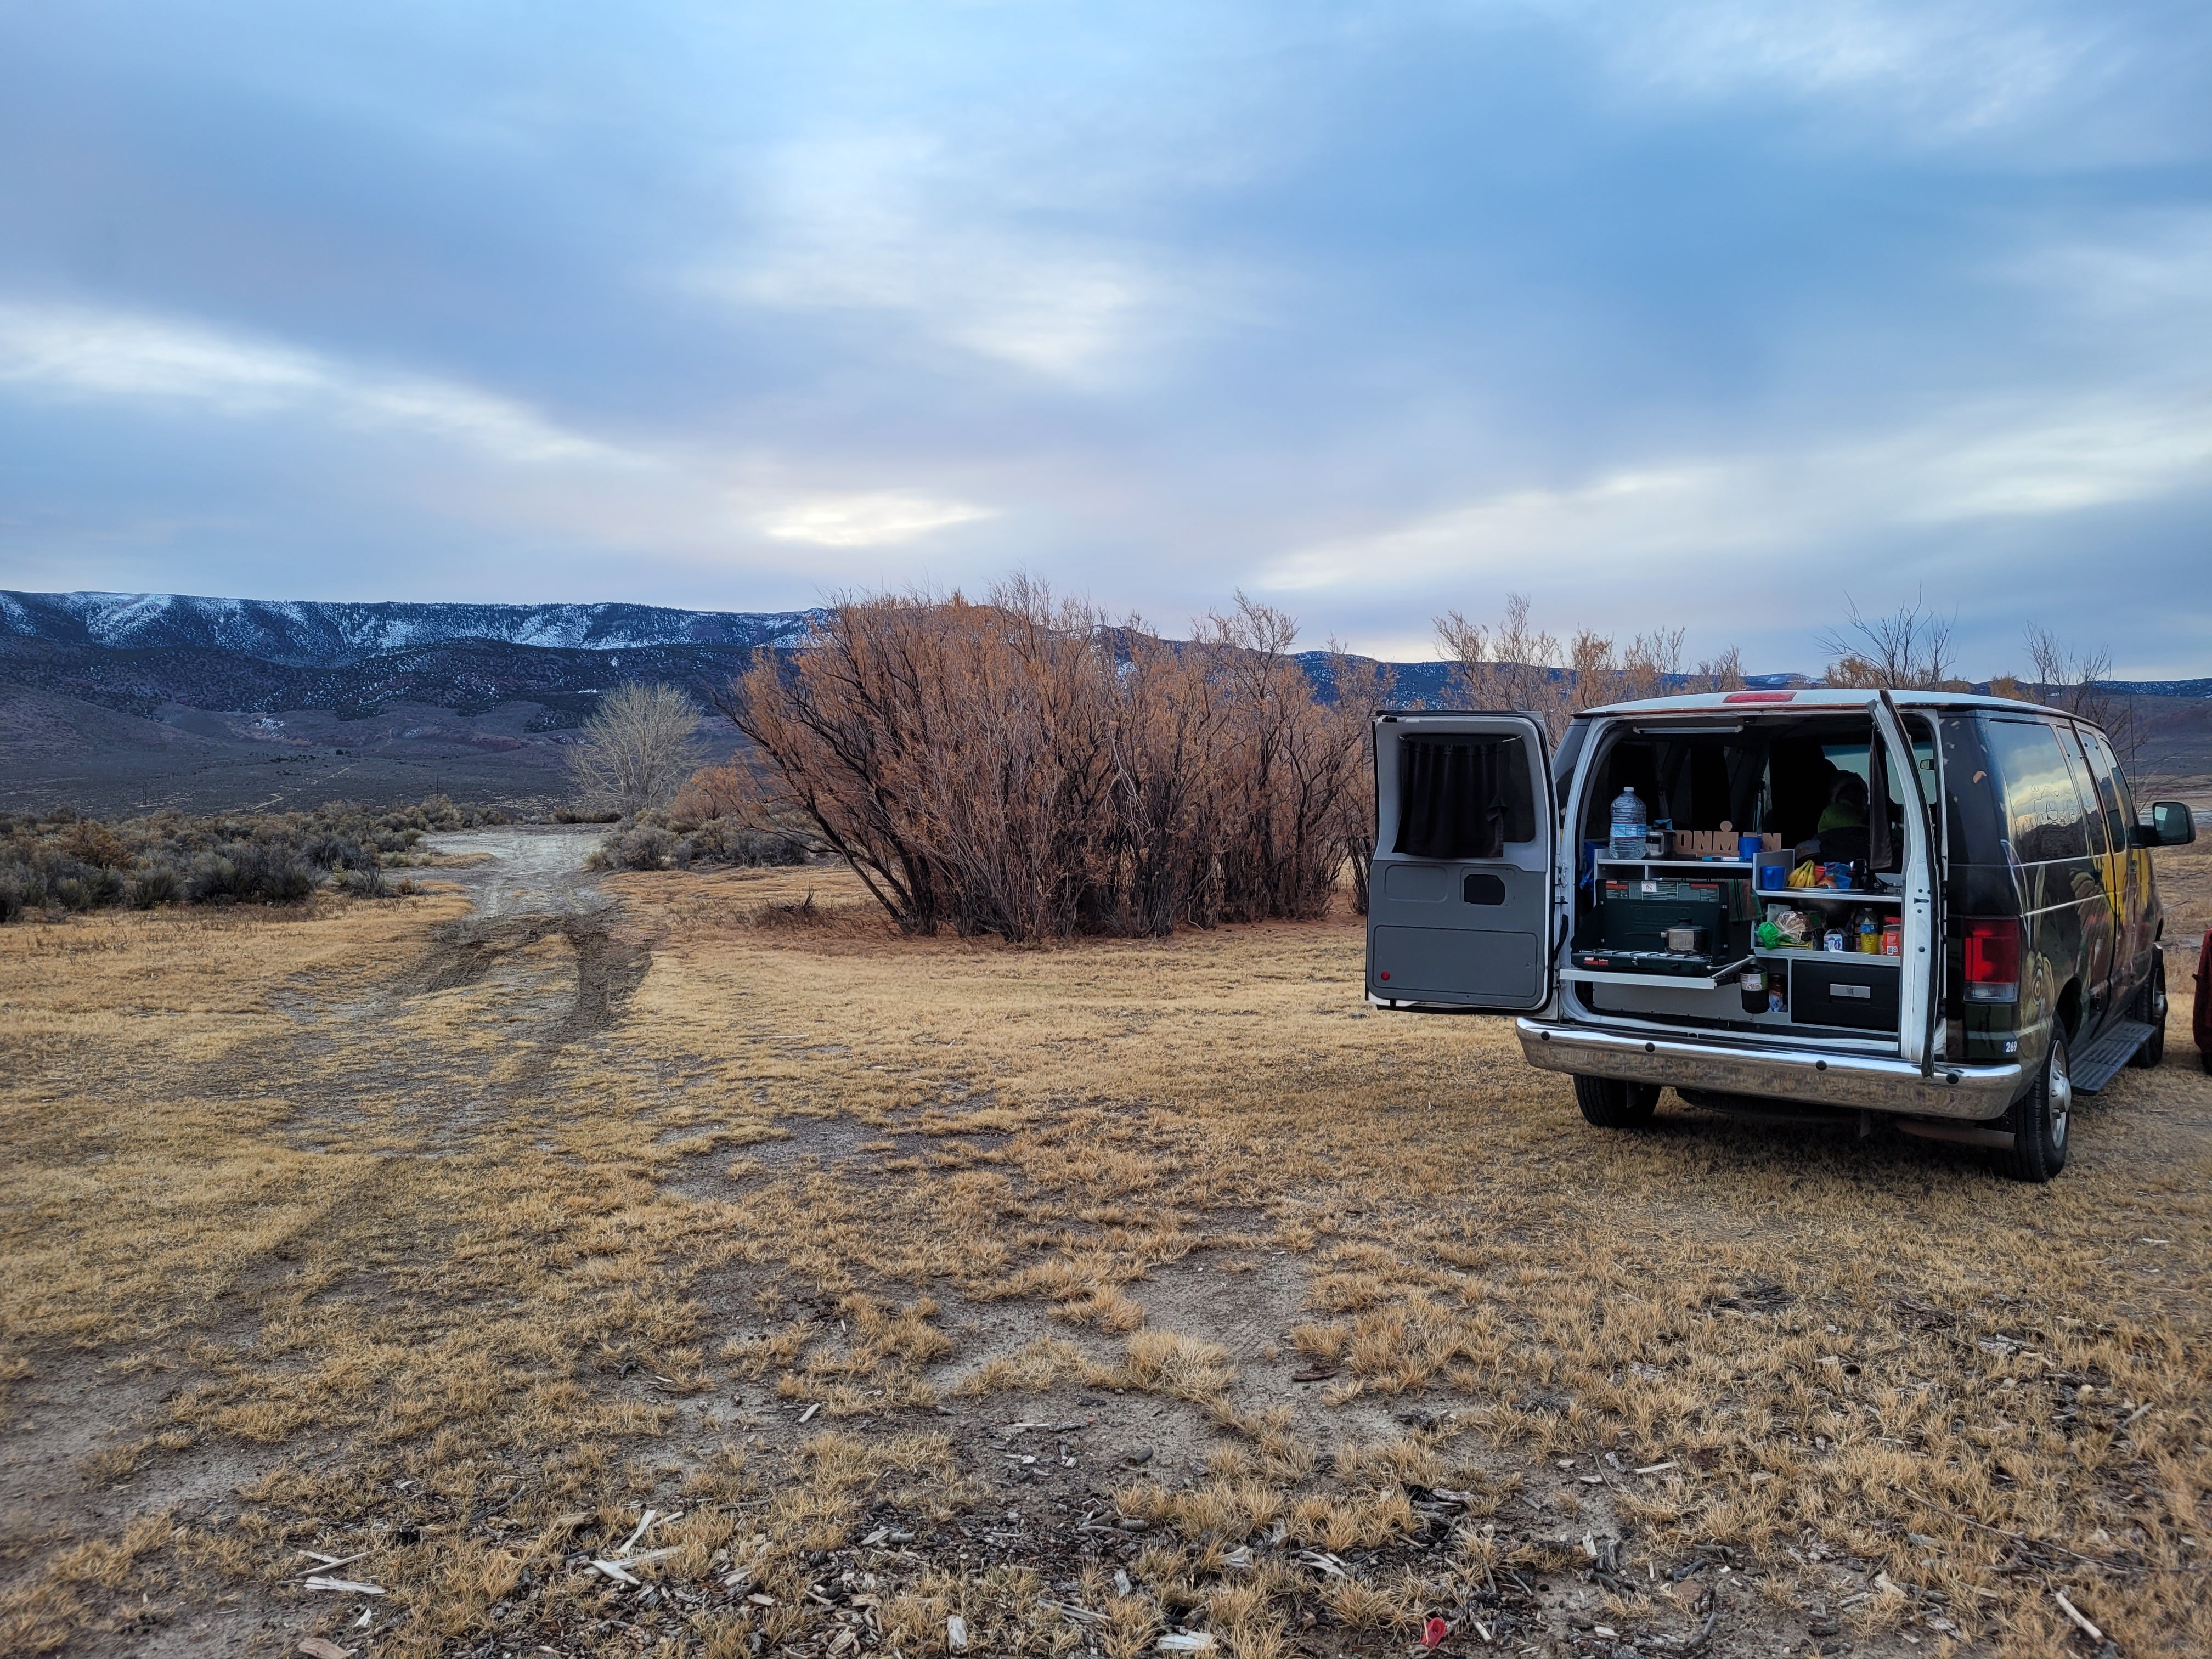 Camper submitted image from Otter Creek, Tamerisk Point Rec Site - 5